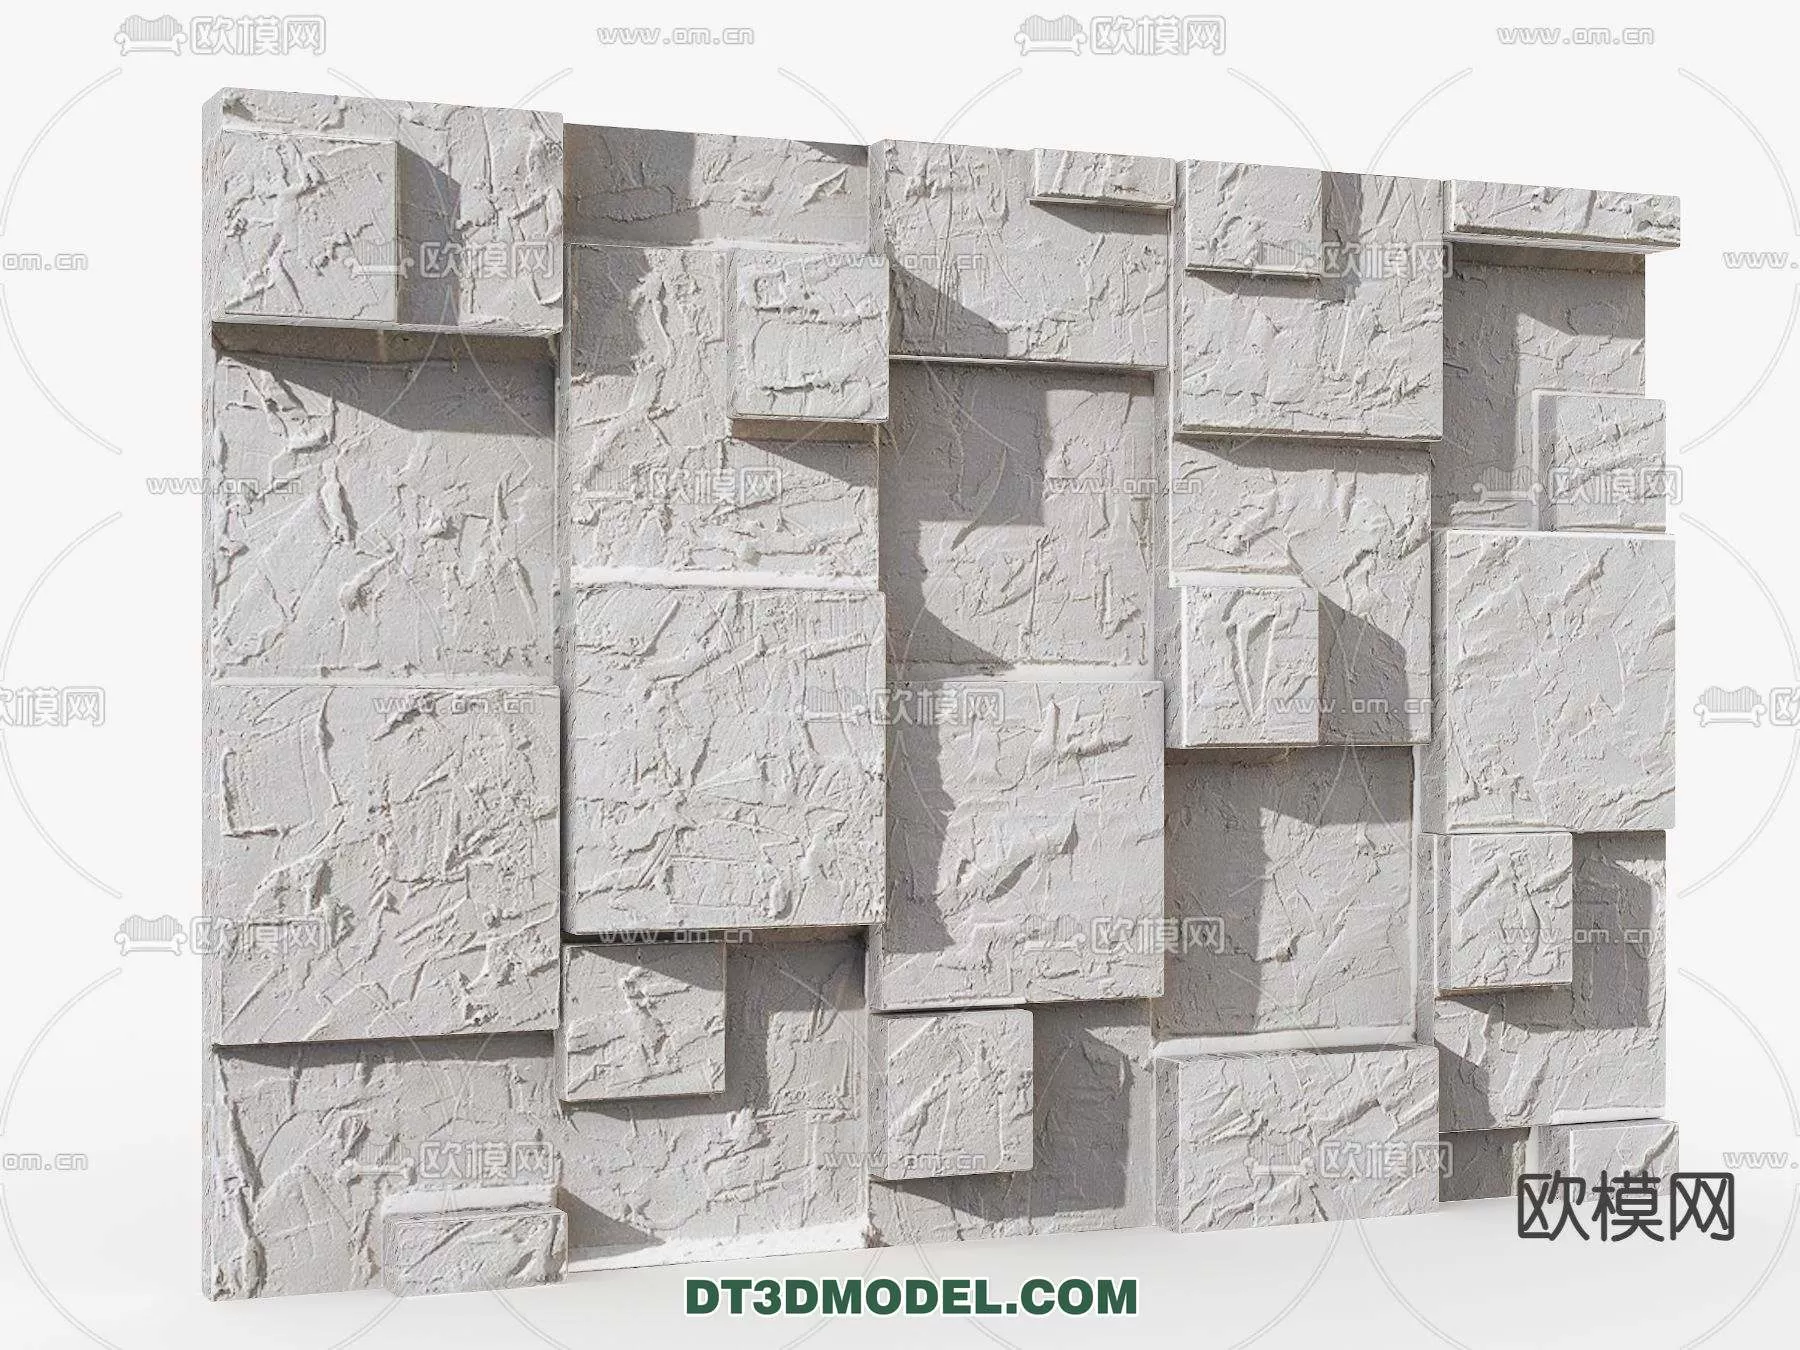 MATERIAL – TEXTURES – ROCK WALL – 0098